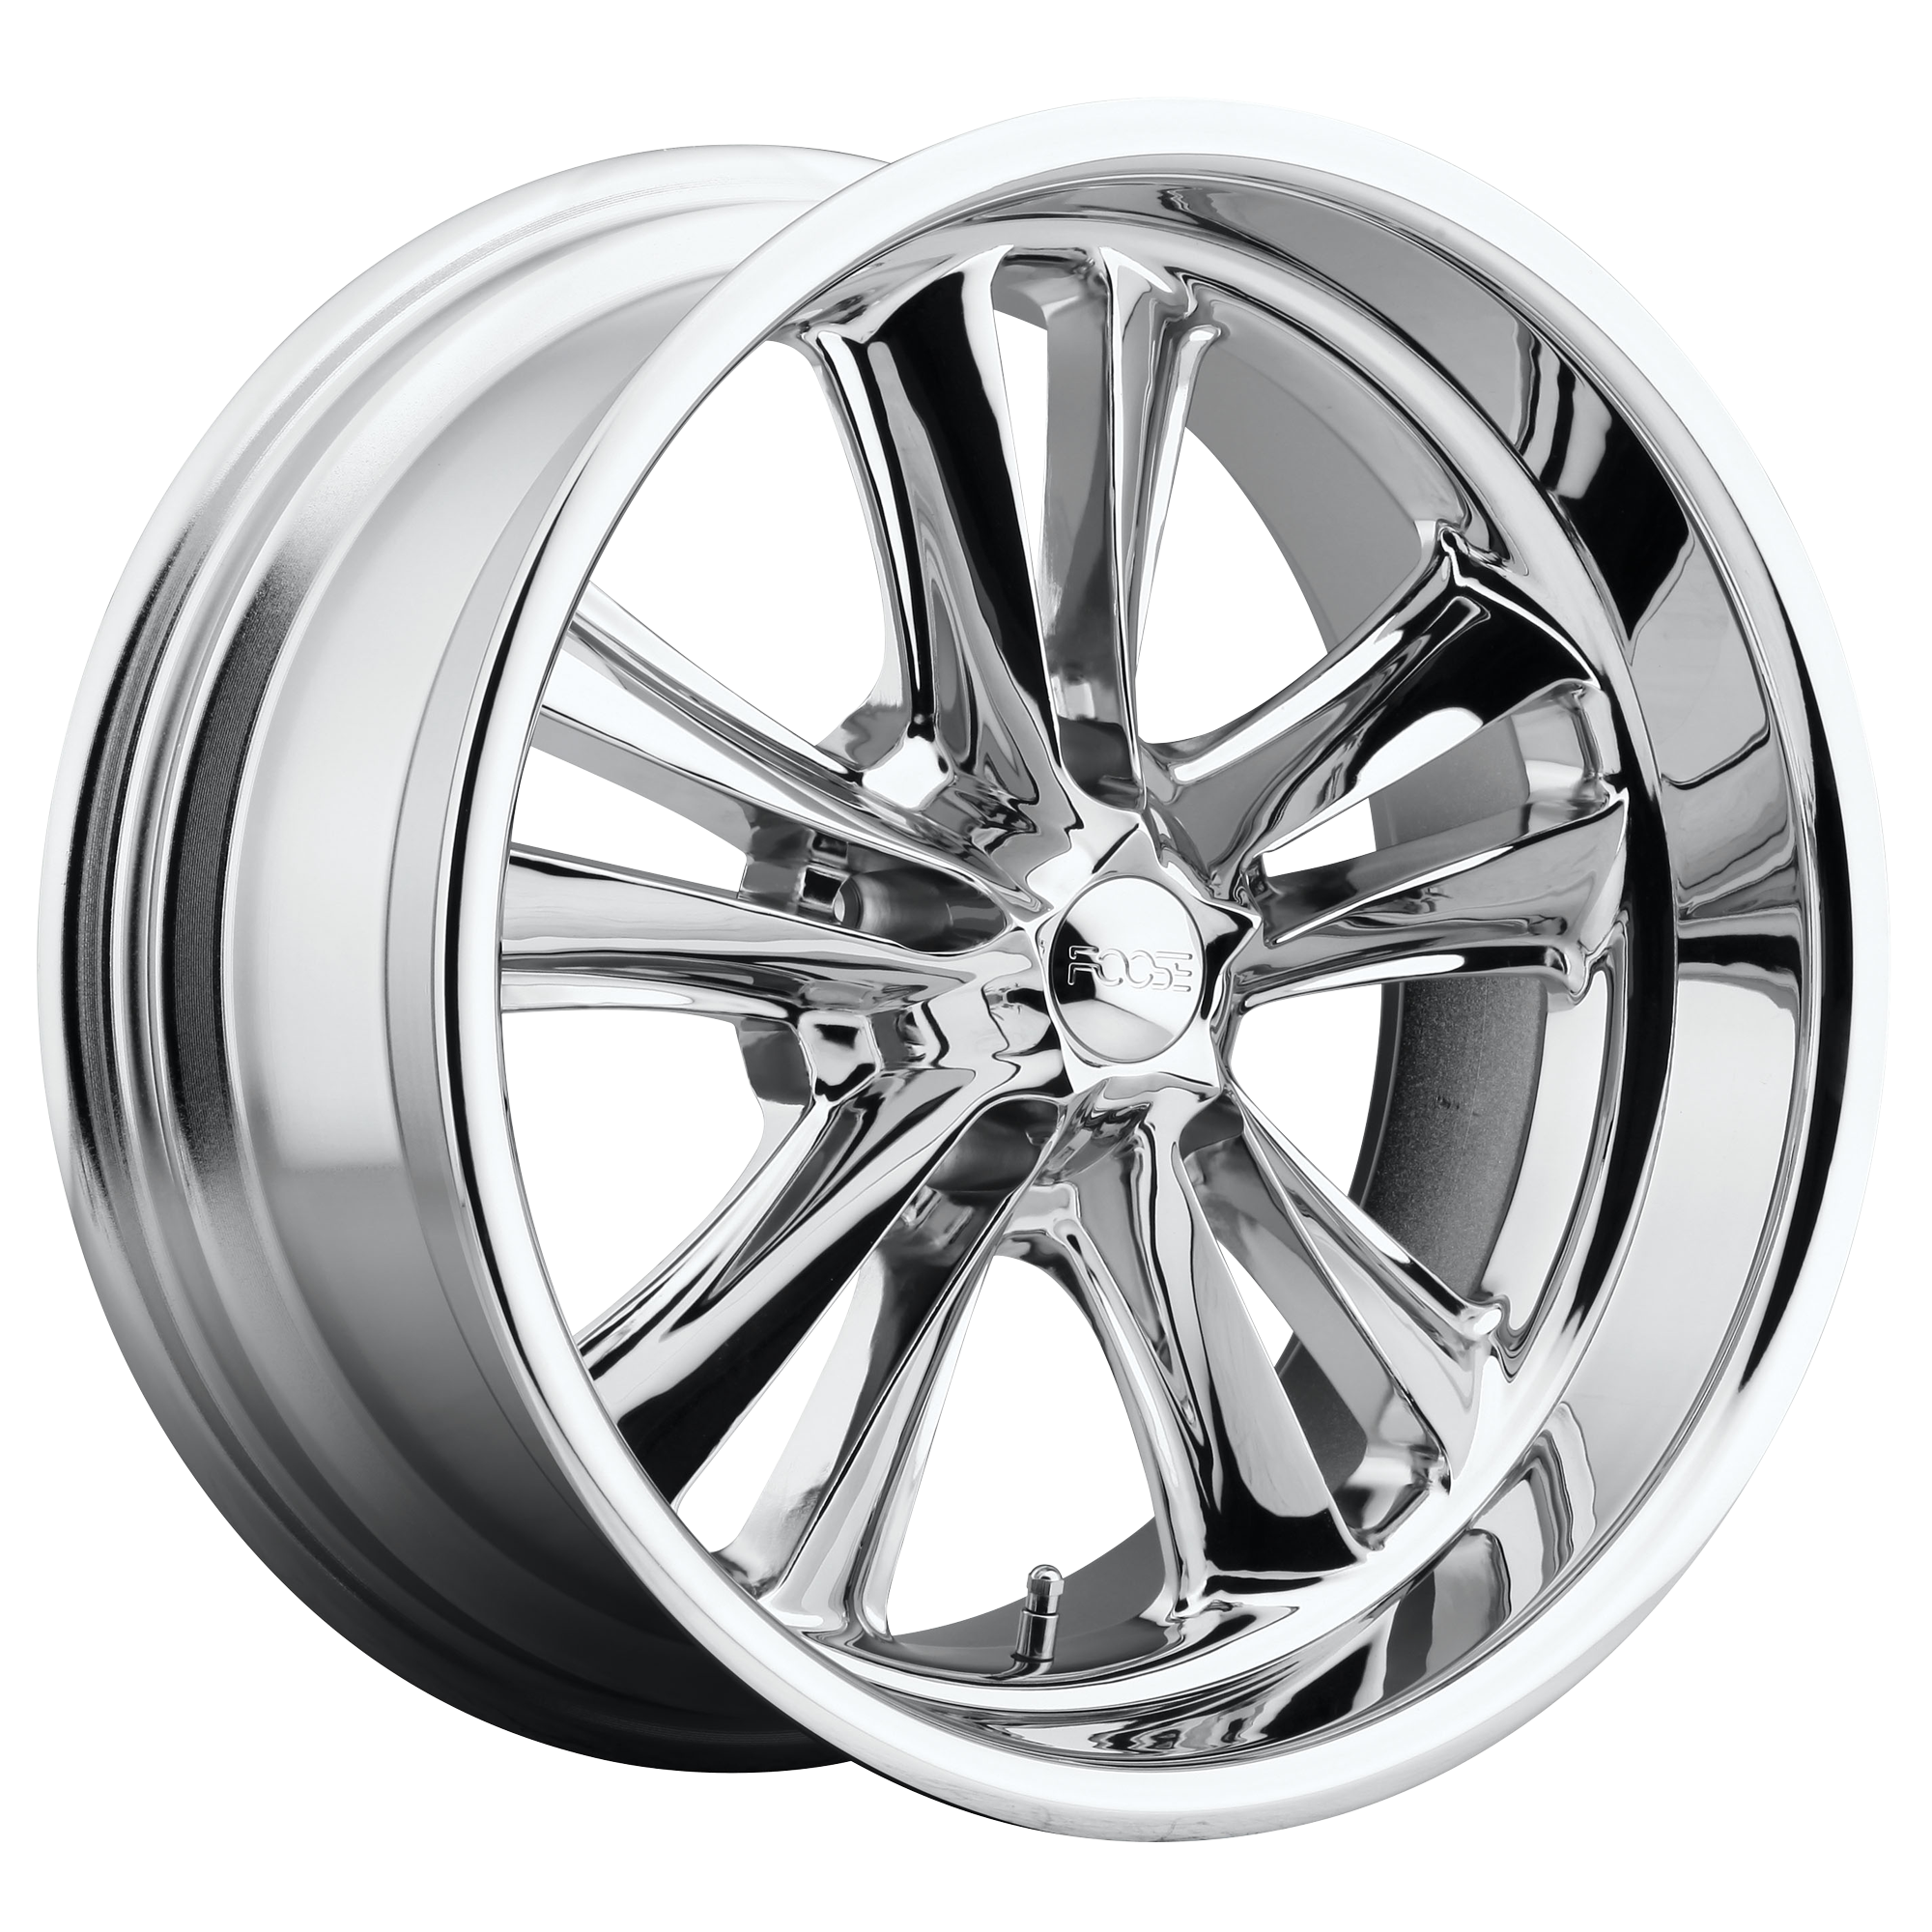 KNUCKLE 18x9.5 5x120.65 CHROME PLATED (1 mm) - Tires and Engine Performance